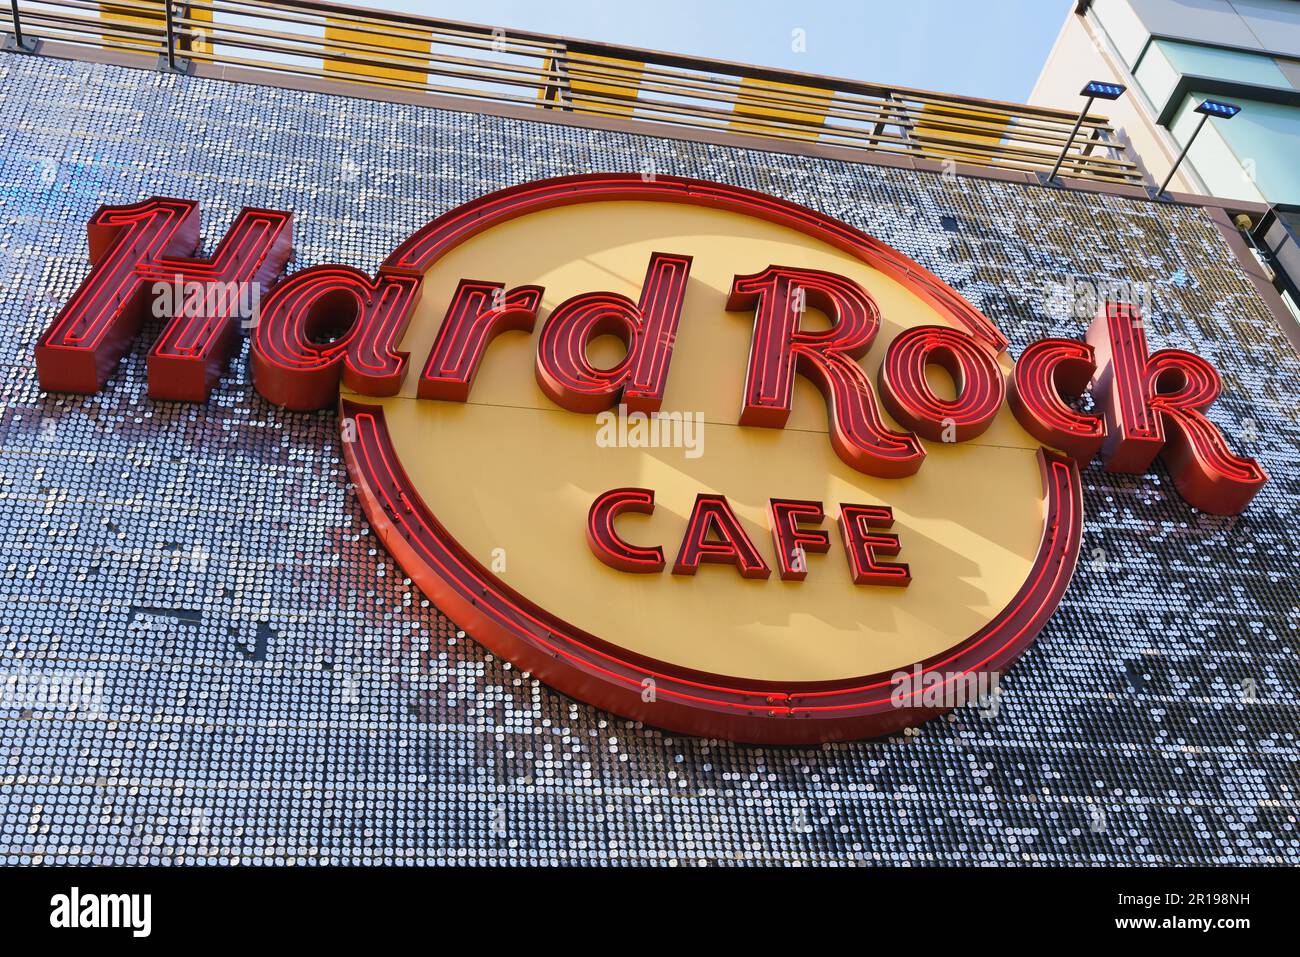 Hard Rock Cafe Hollywood. British-American multinational theme restaurant on Hollywood Boulevard in Los Angeles, USA. Stock Photo